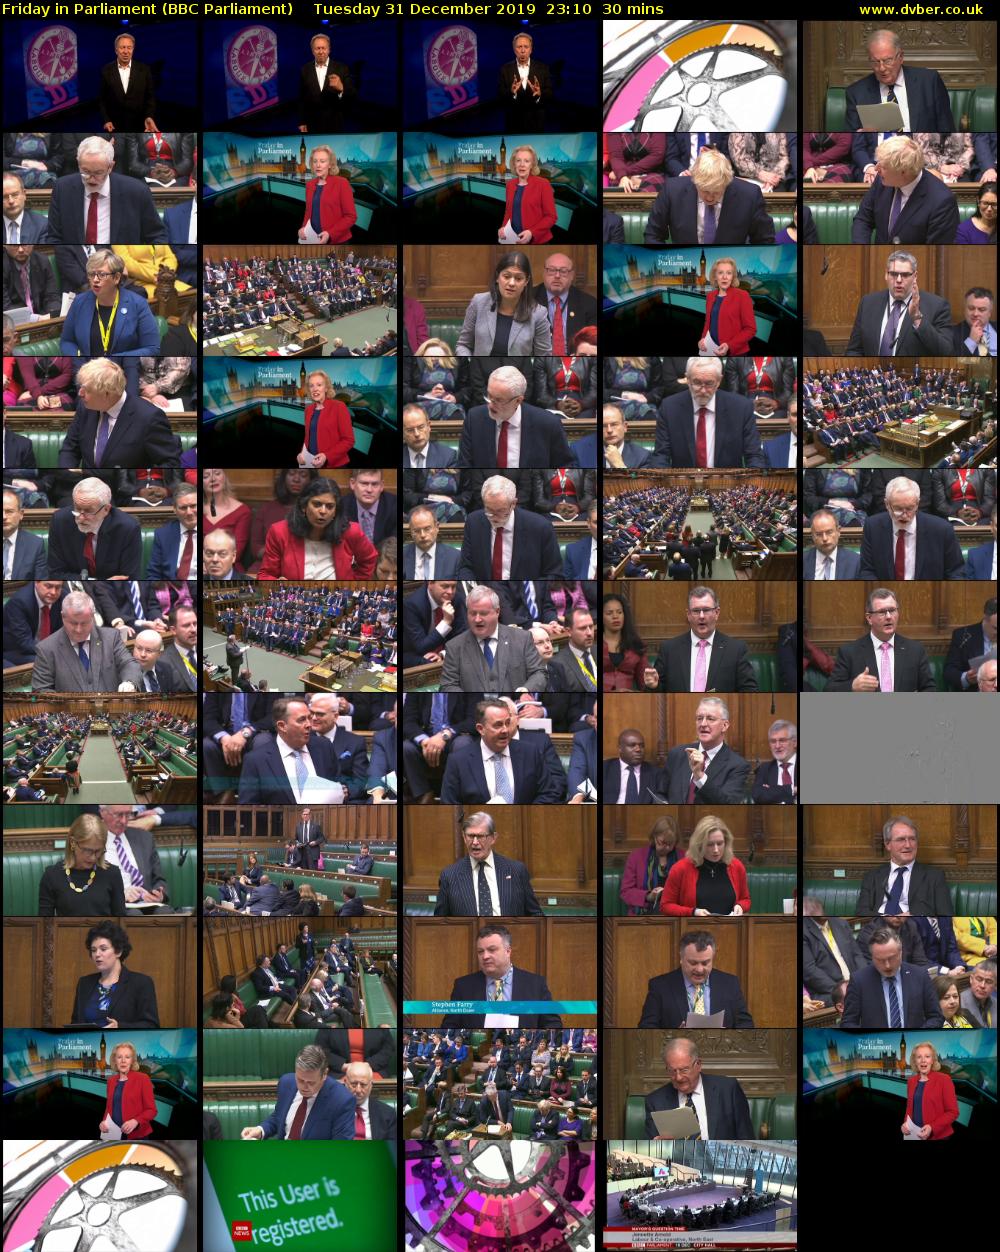 Friday in Parliament (BBC Parliament) Tuesday 31 December 2019 23:10 - 23:40